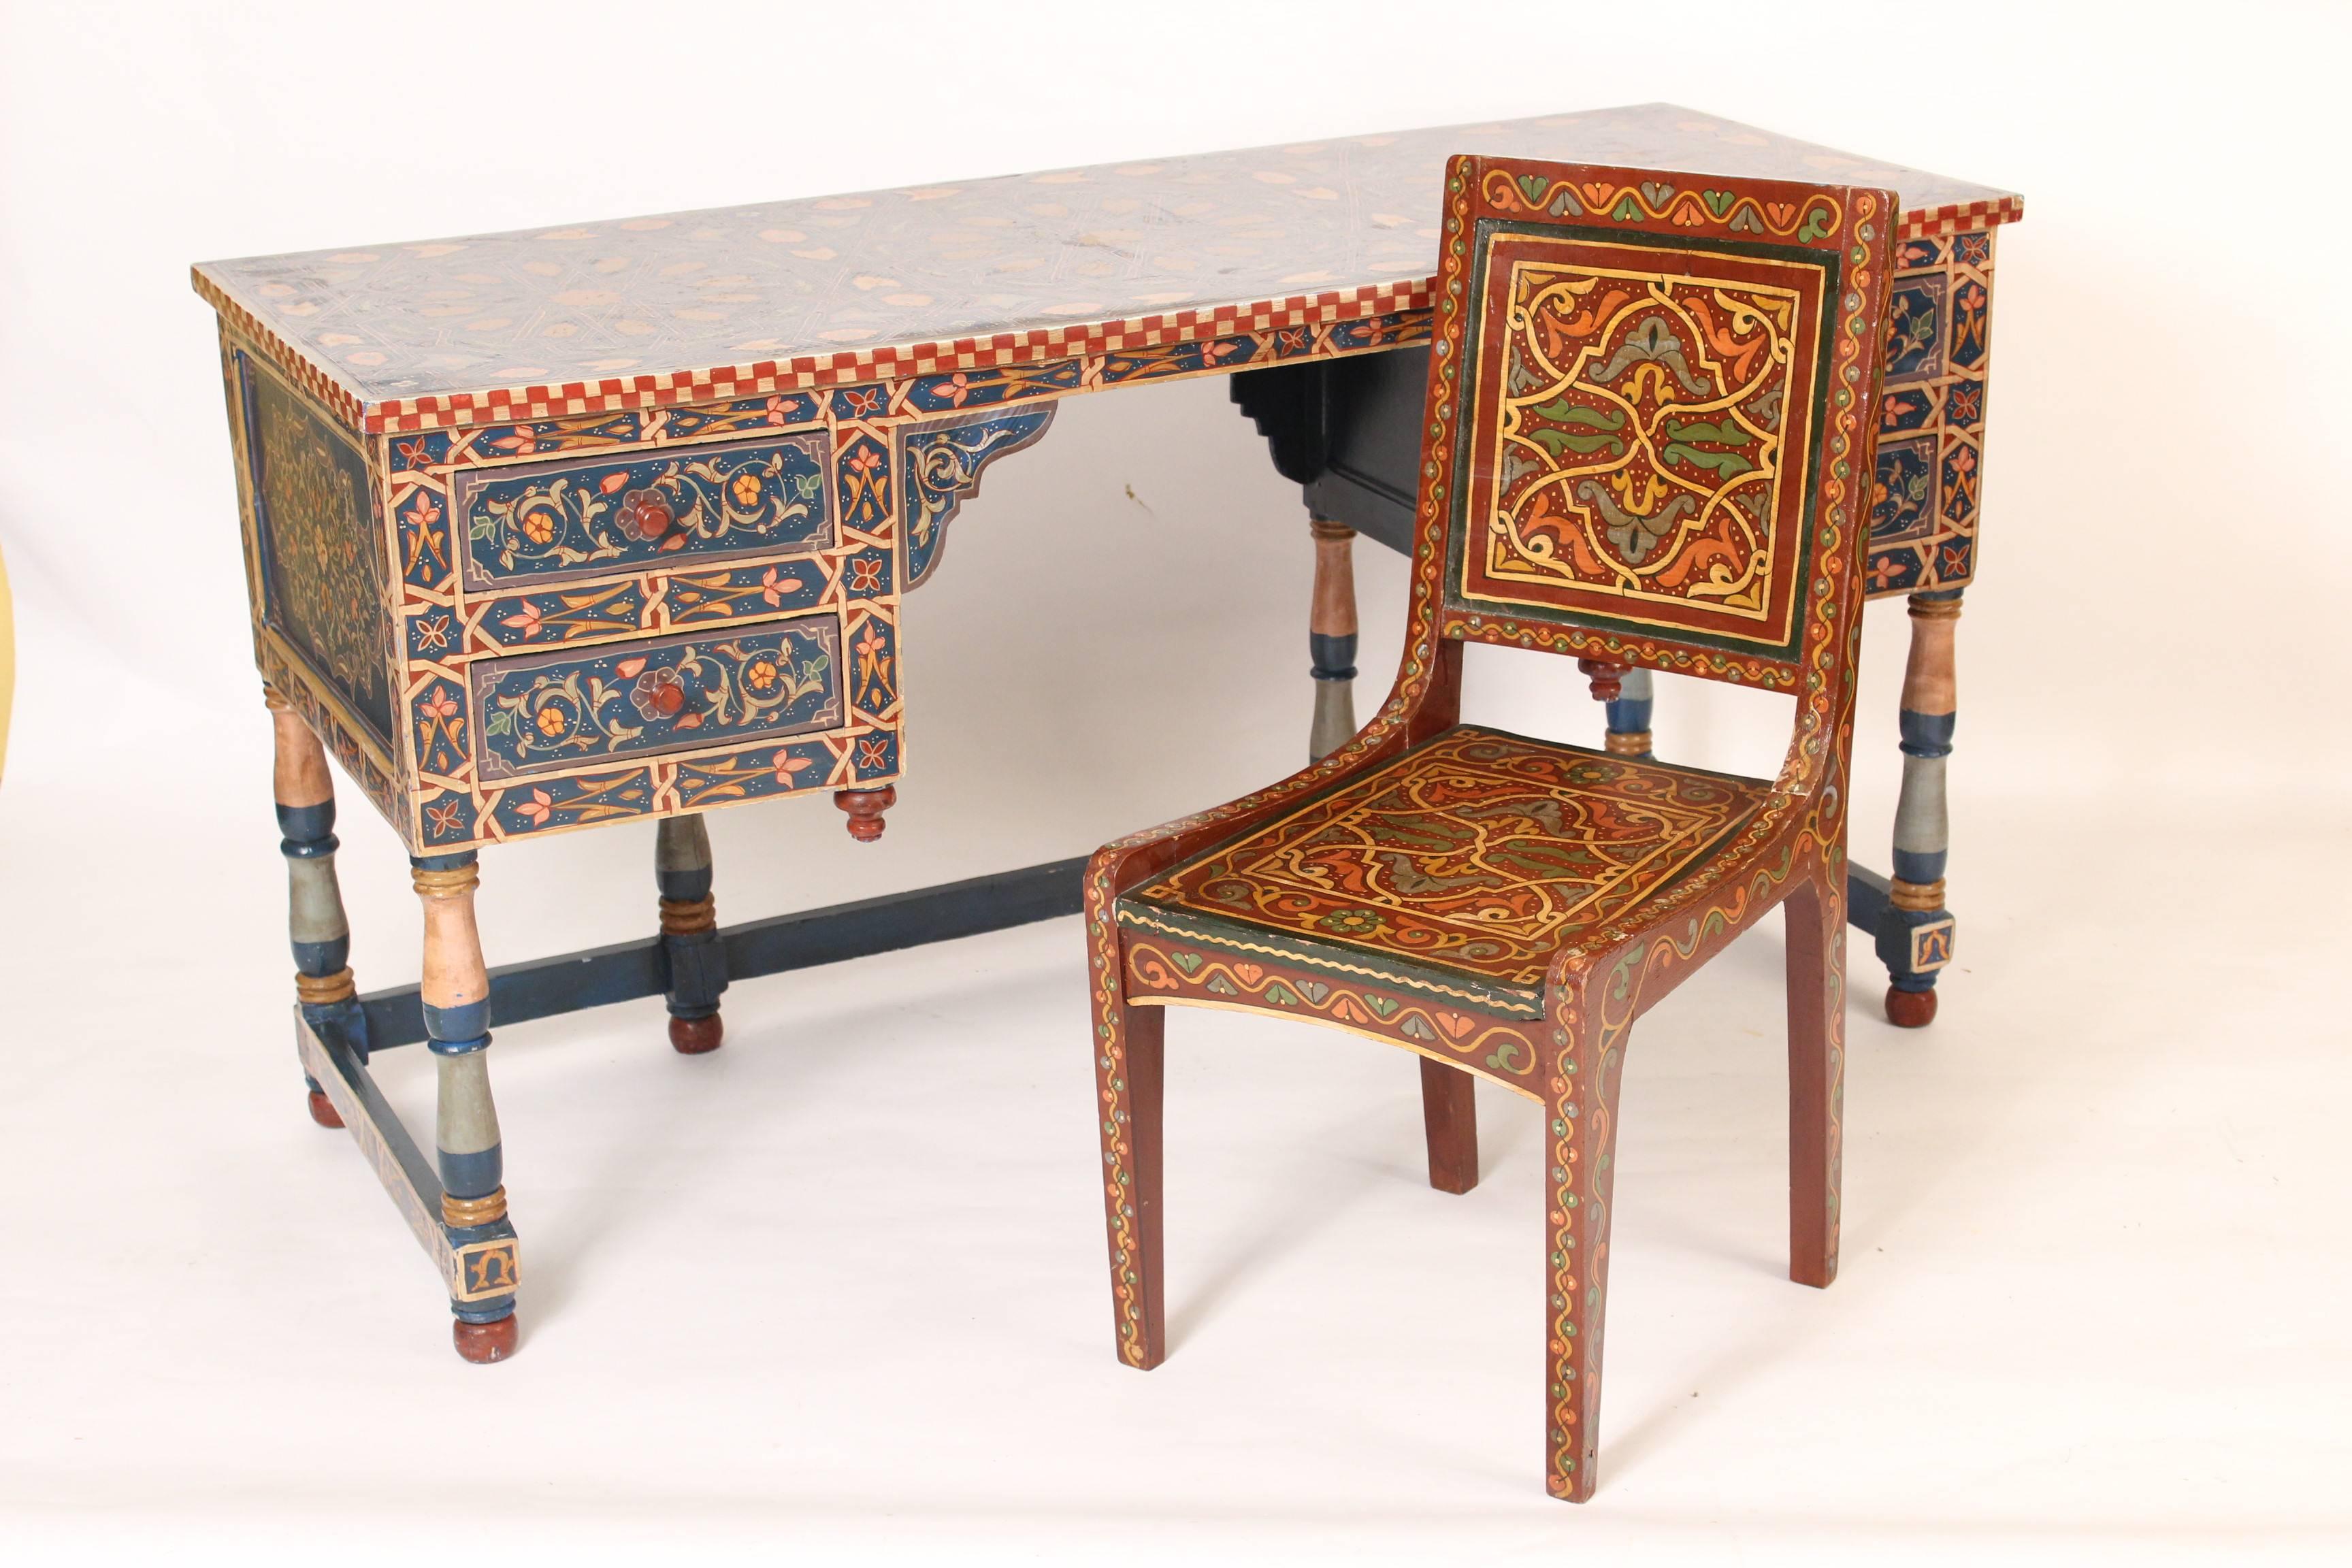 Colorful Moroccan style painted knee hole desk, late 20th century. There is also a chair that is included in the price of this desk. This is a very colorful desk that is decorated on the back side so it can float in the center of a room. This is a